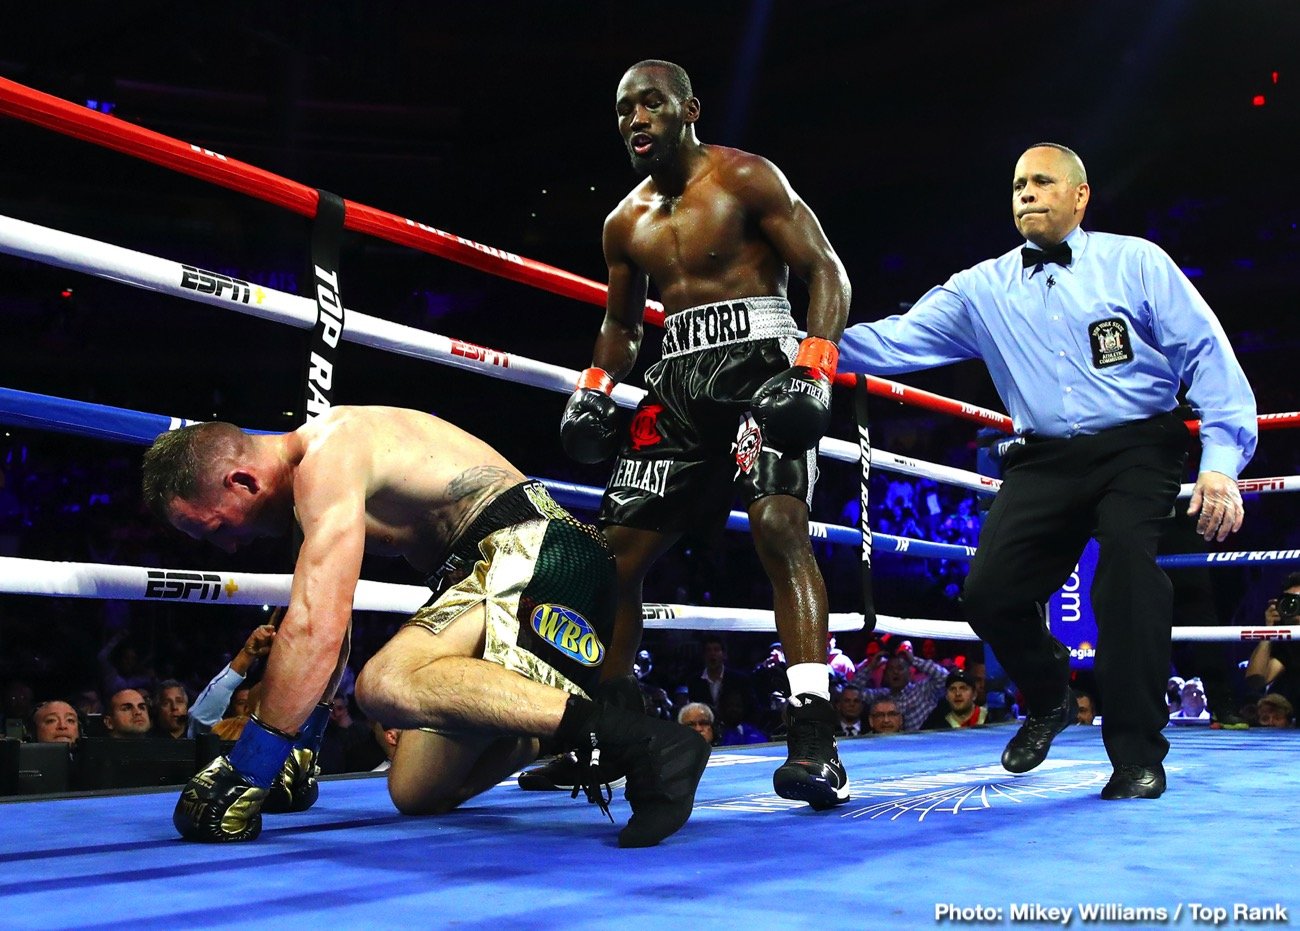 Terence Crawford, Boxing News 24 boxing photo and news image